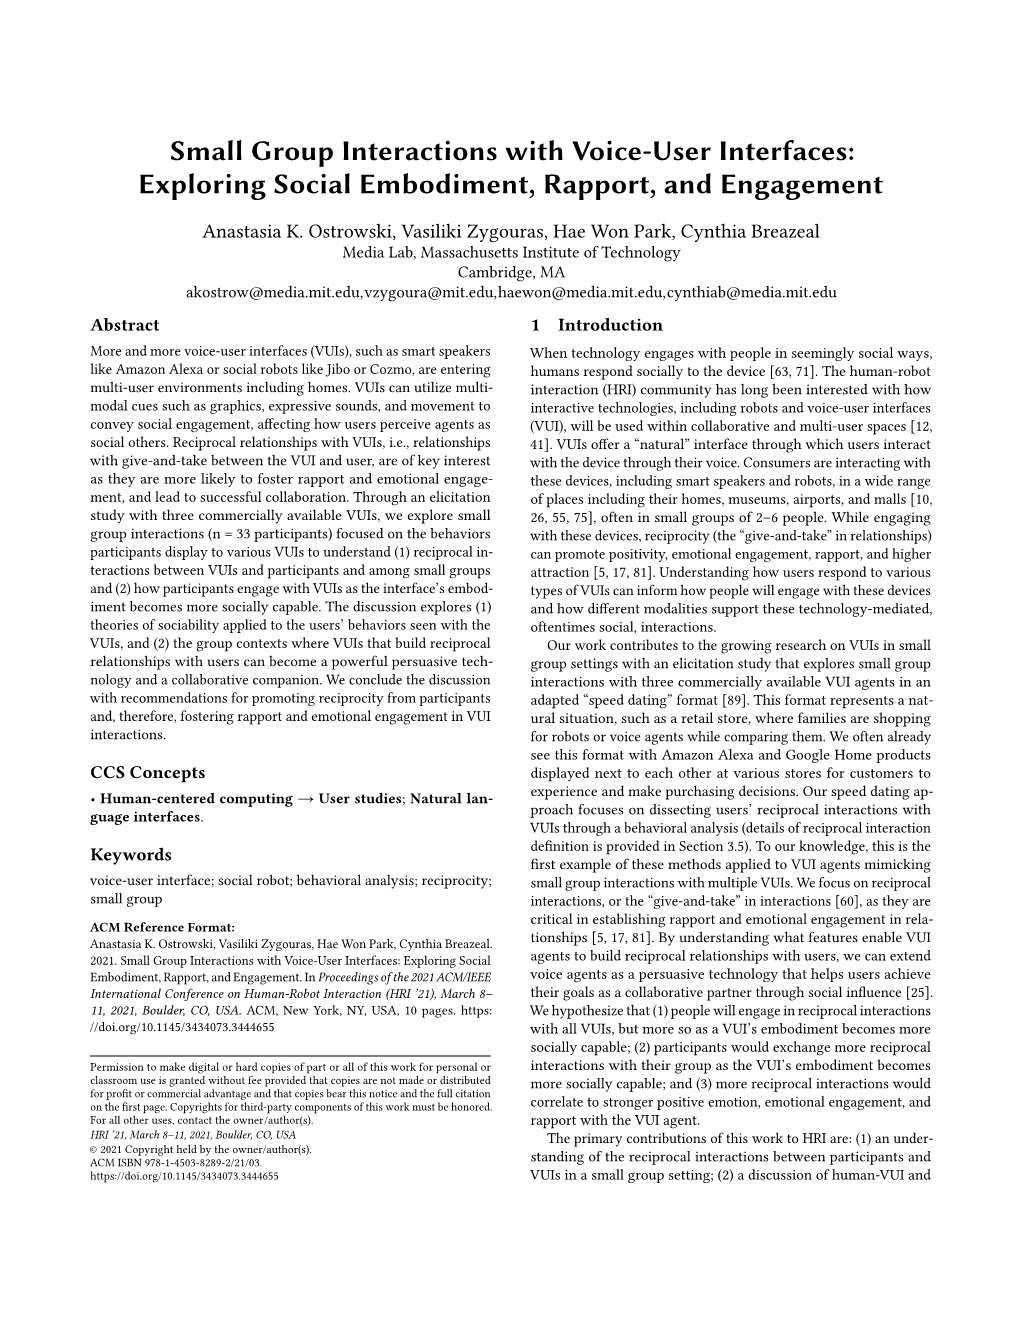 Small Group Interactions with Voice-User Interfaces: Exploring Social Embodiment, Rapport, and Engagement